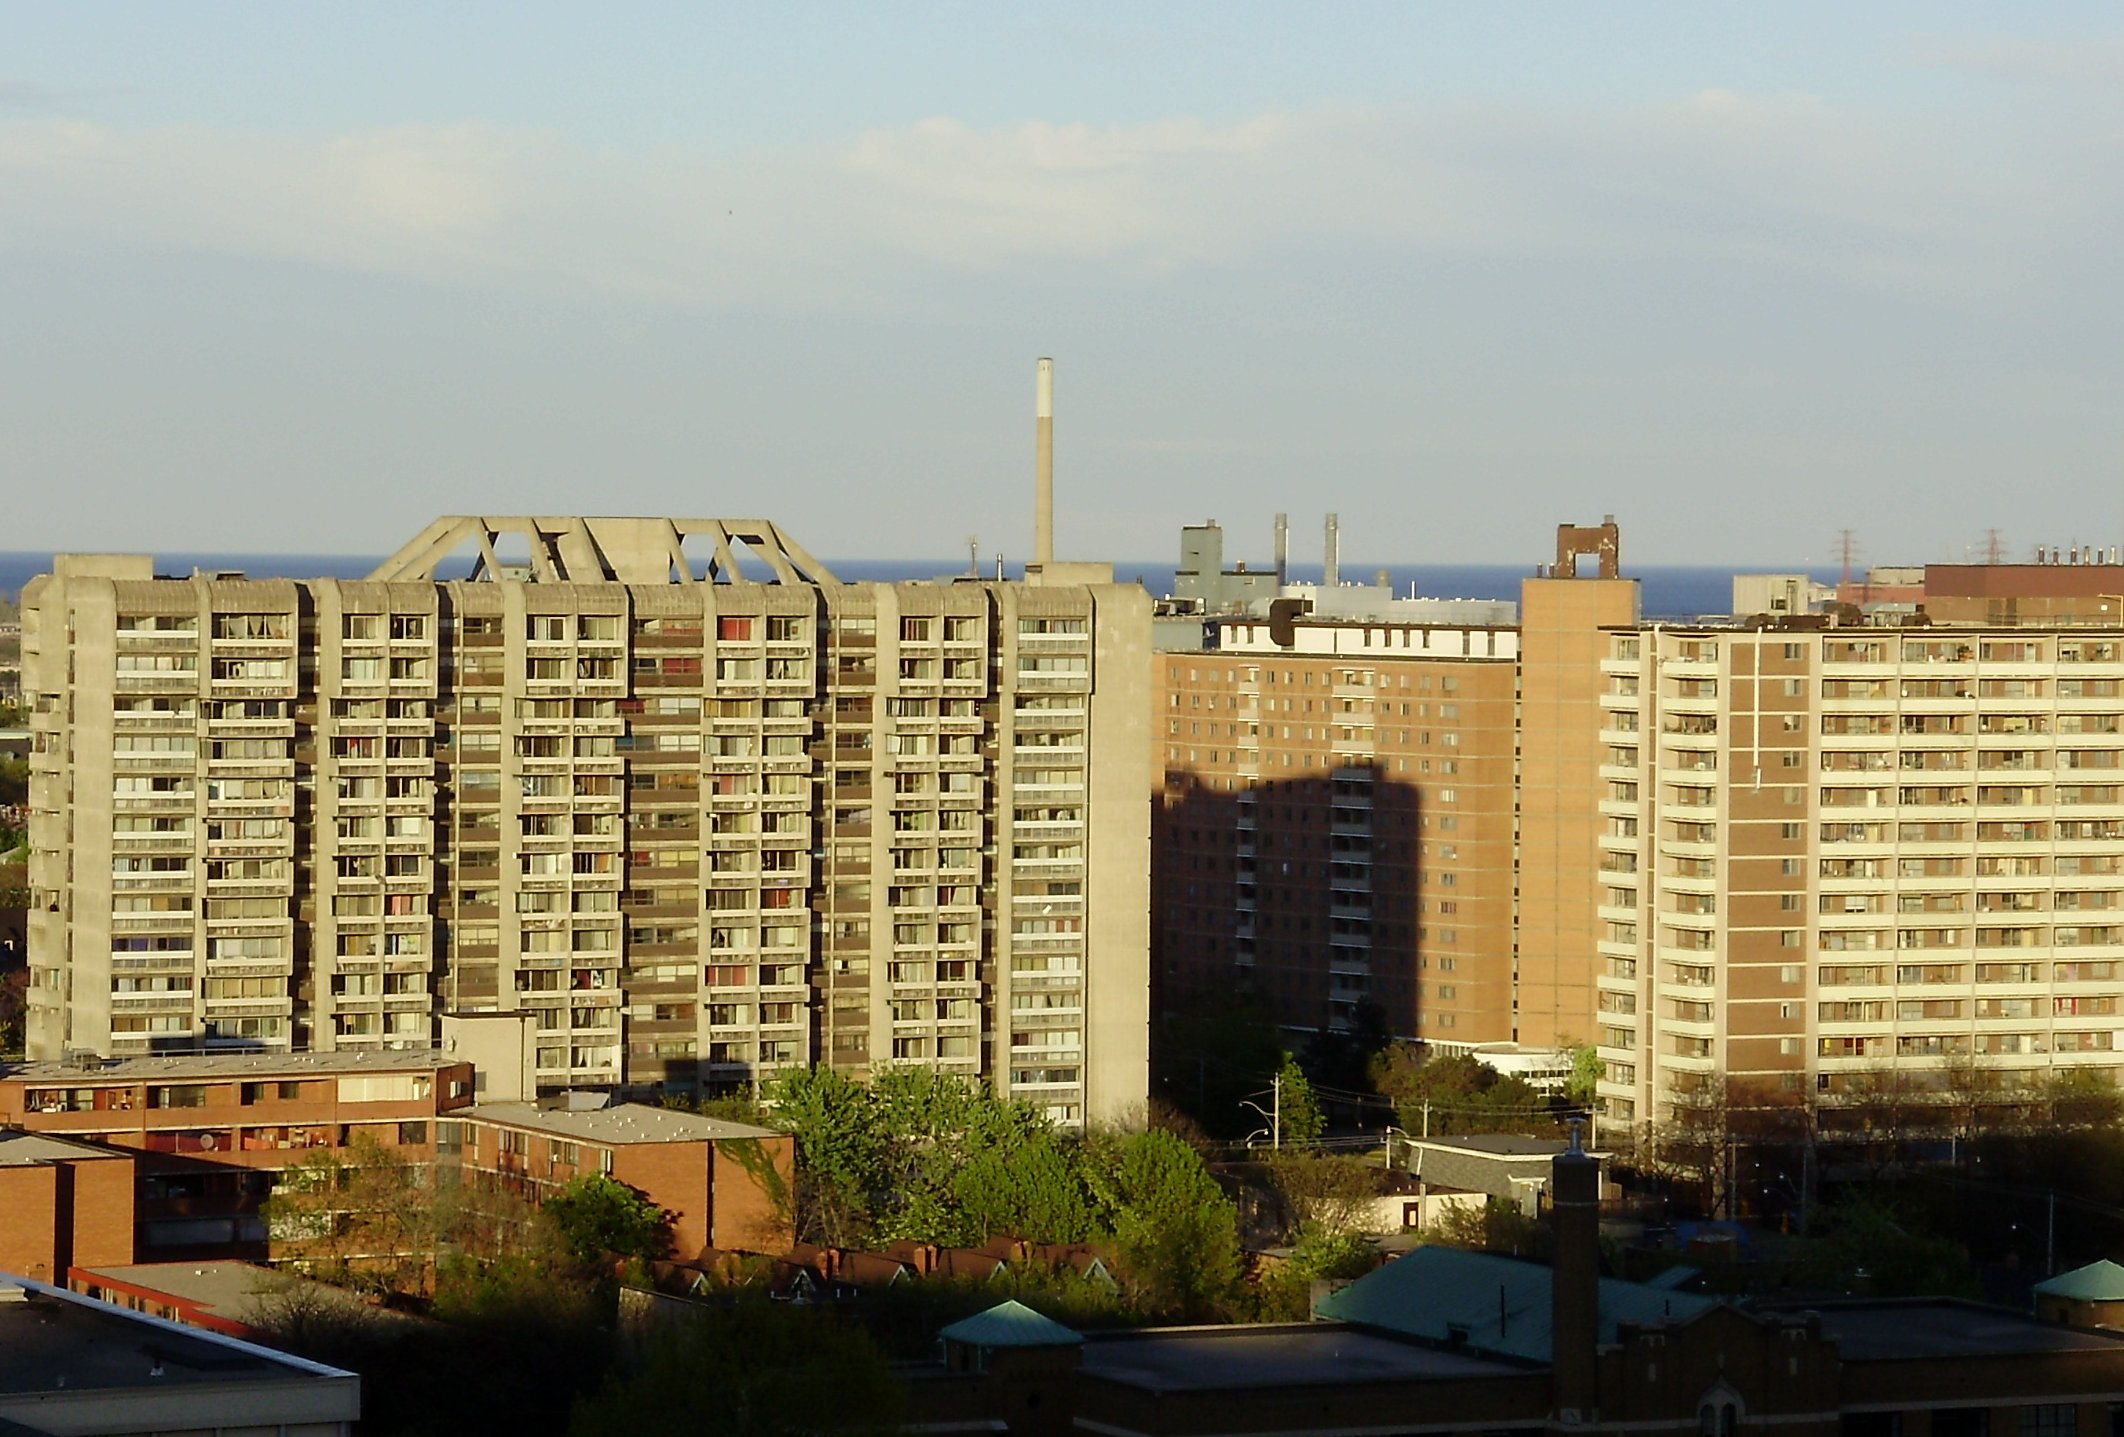 Apartment buildings in Toronto. Image: Wikimedia Commons